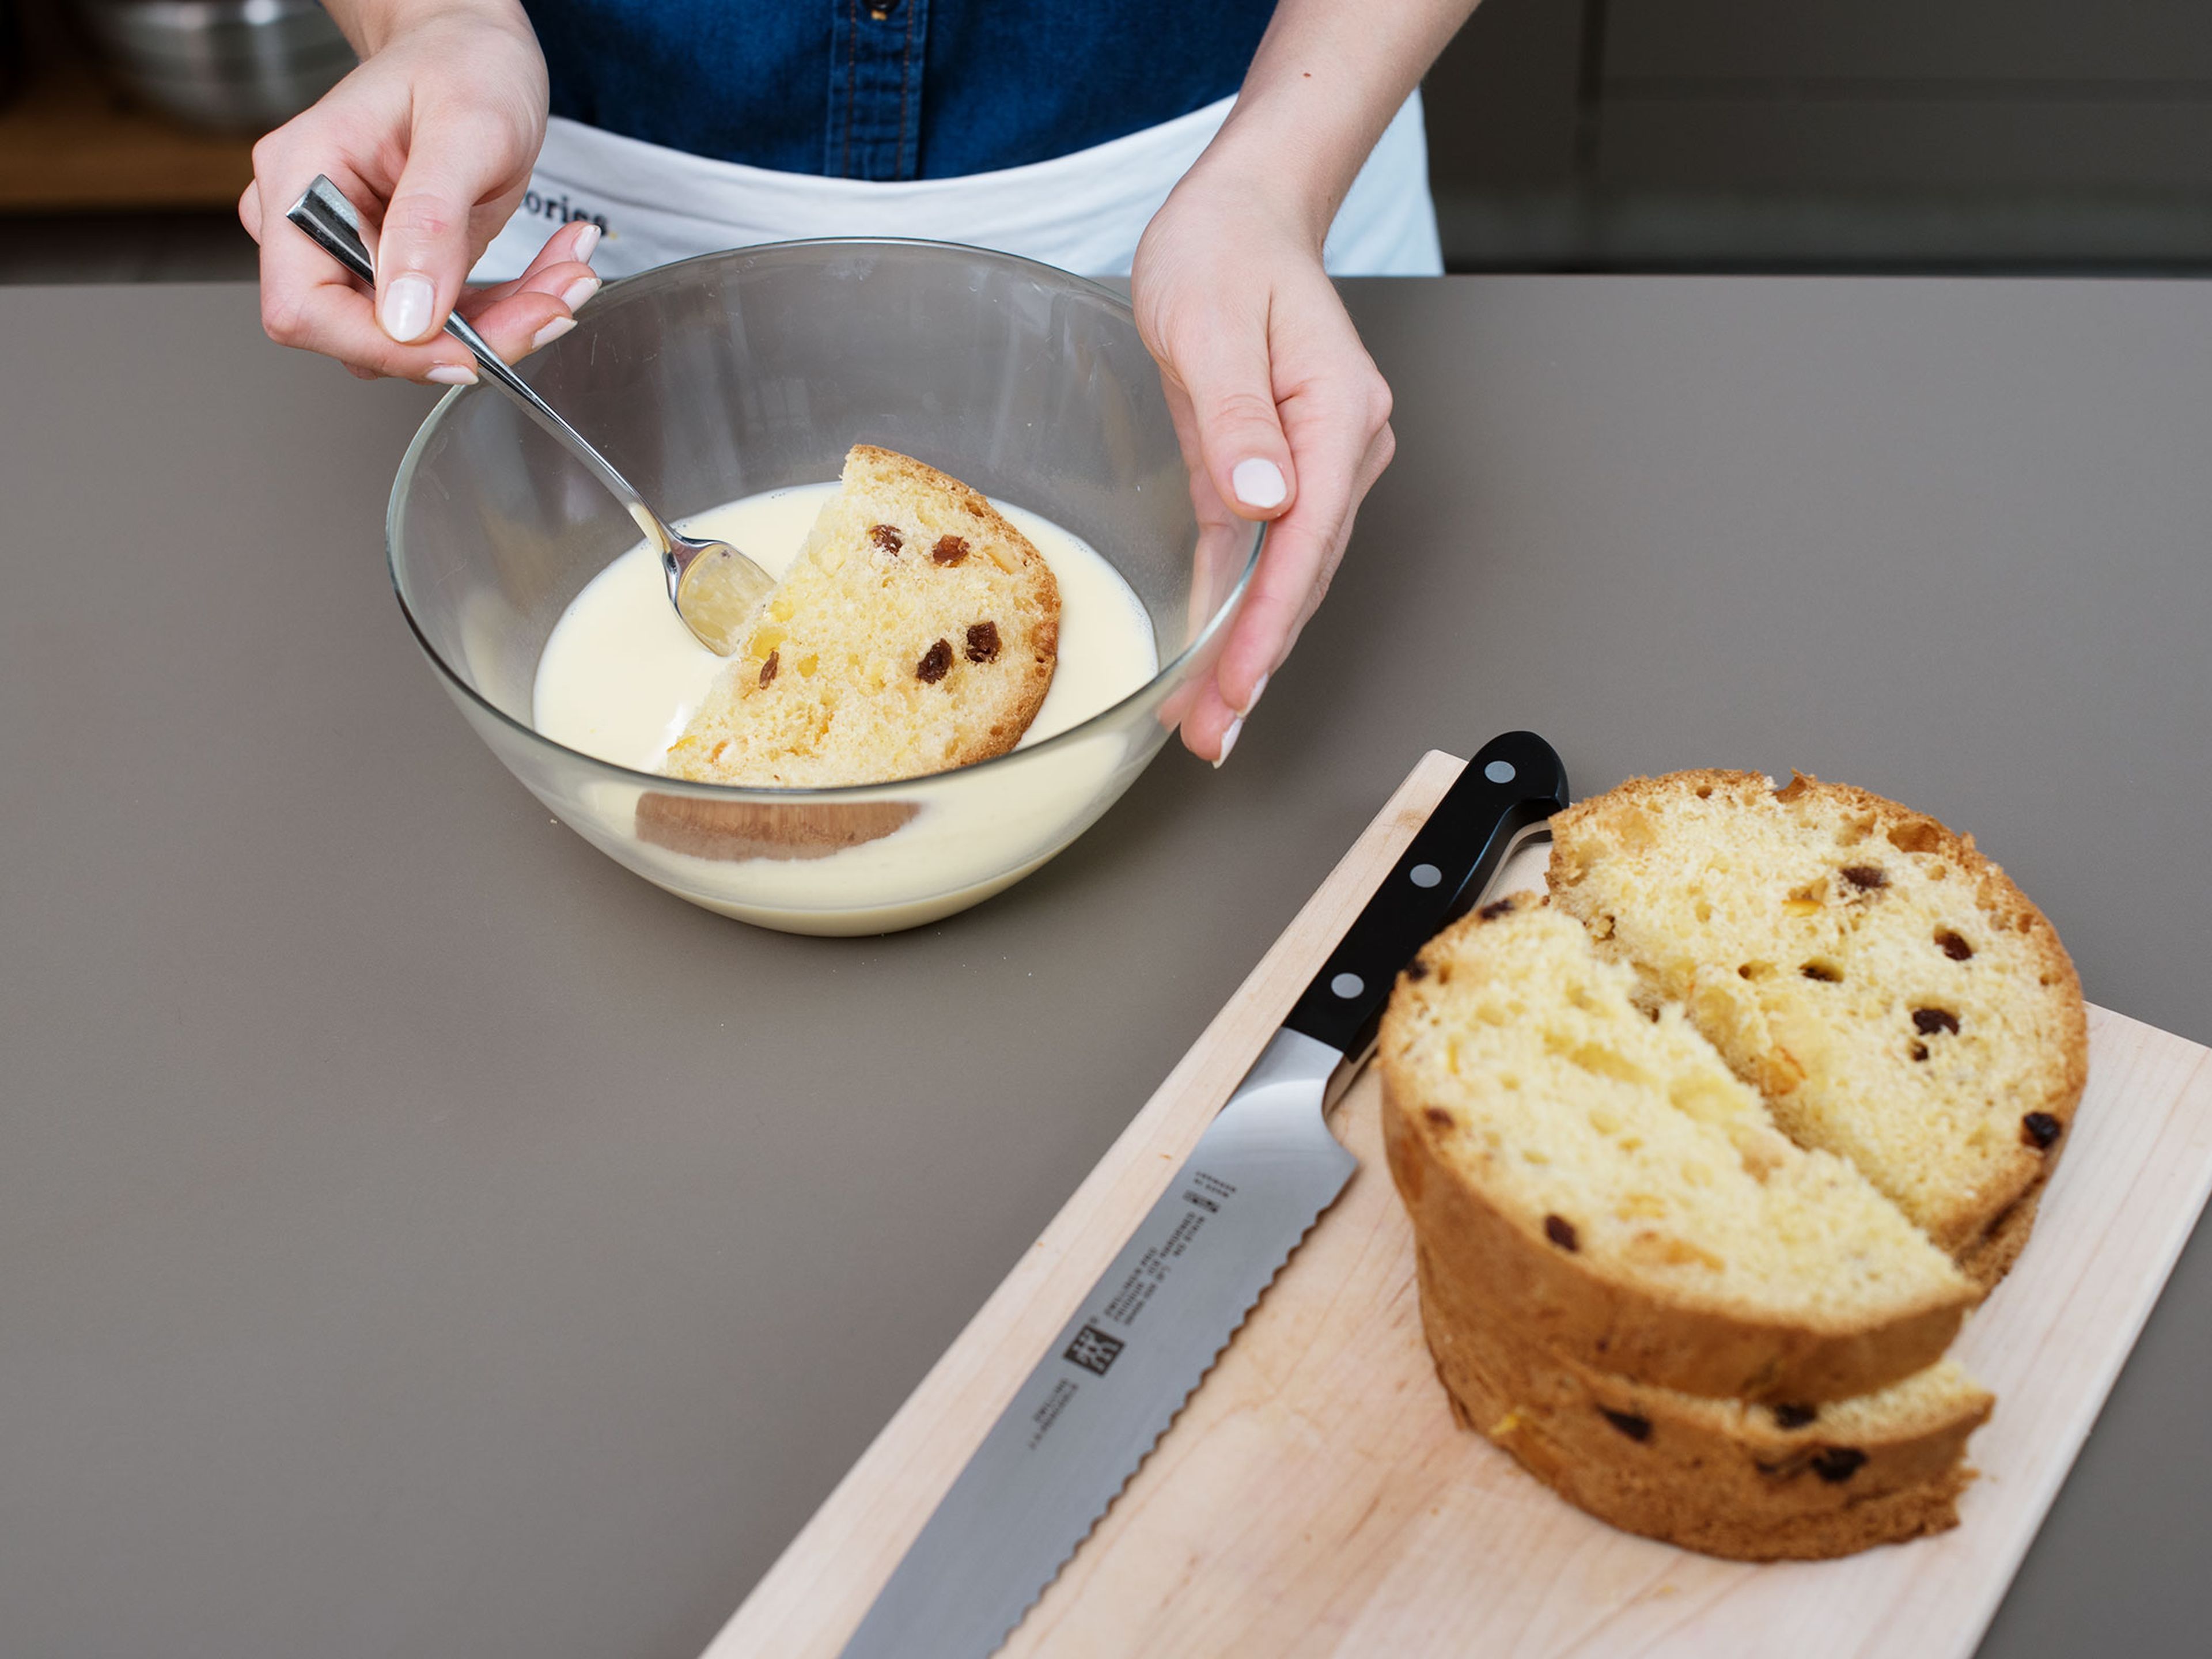 Mix yogurt, cinnamon, and vanilla sugar in a bowl and set aside. In another mixing bowl, whisk together eggs and milk. Cut panettone into 2-cm/0.66-in. thick slices and soak each side in egg mixture.